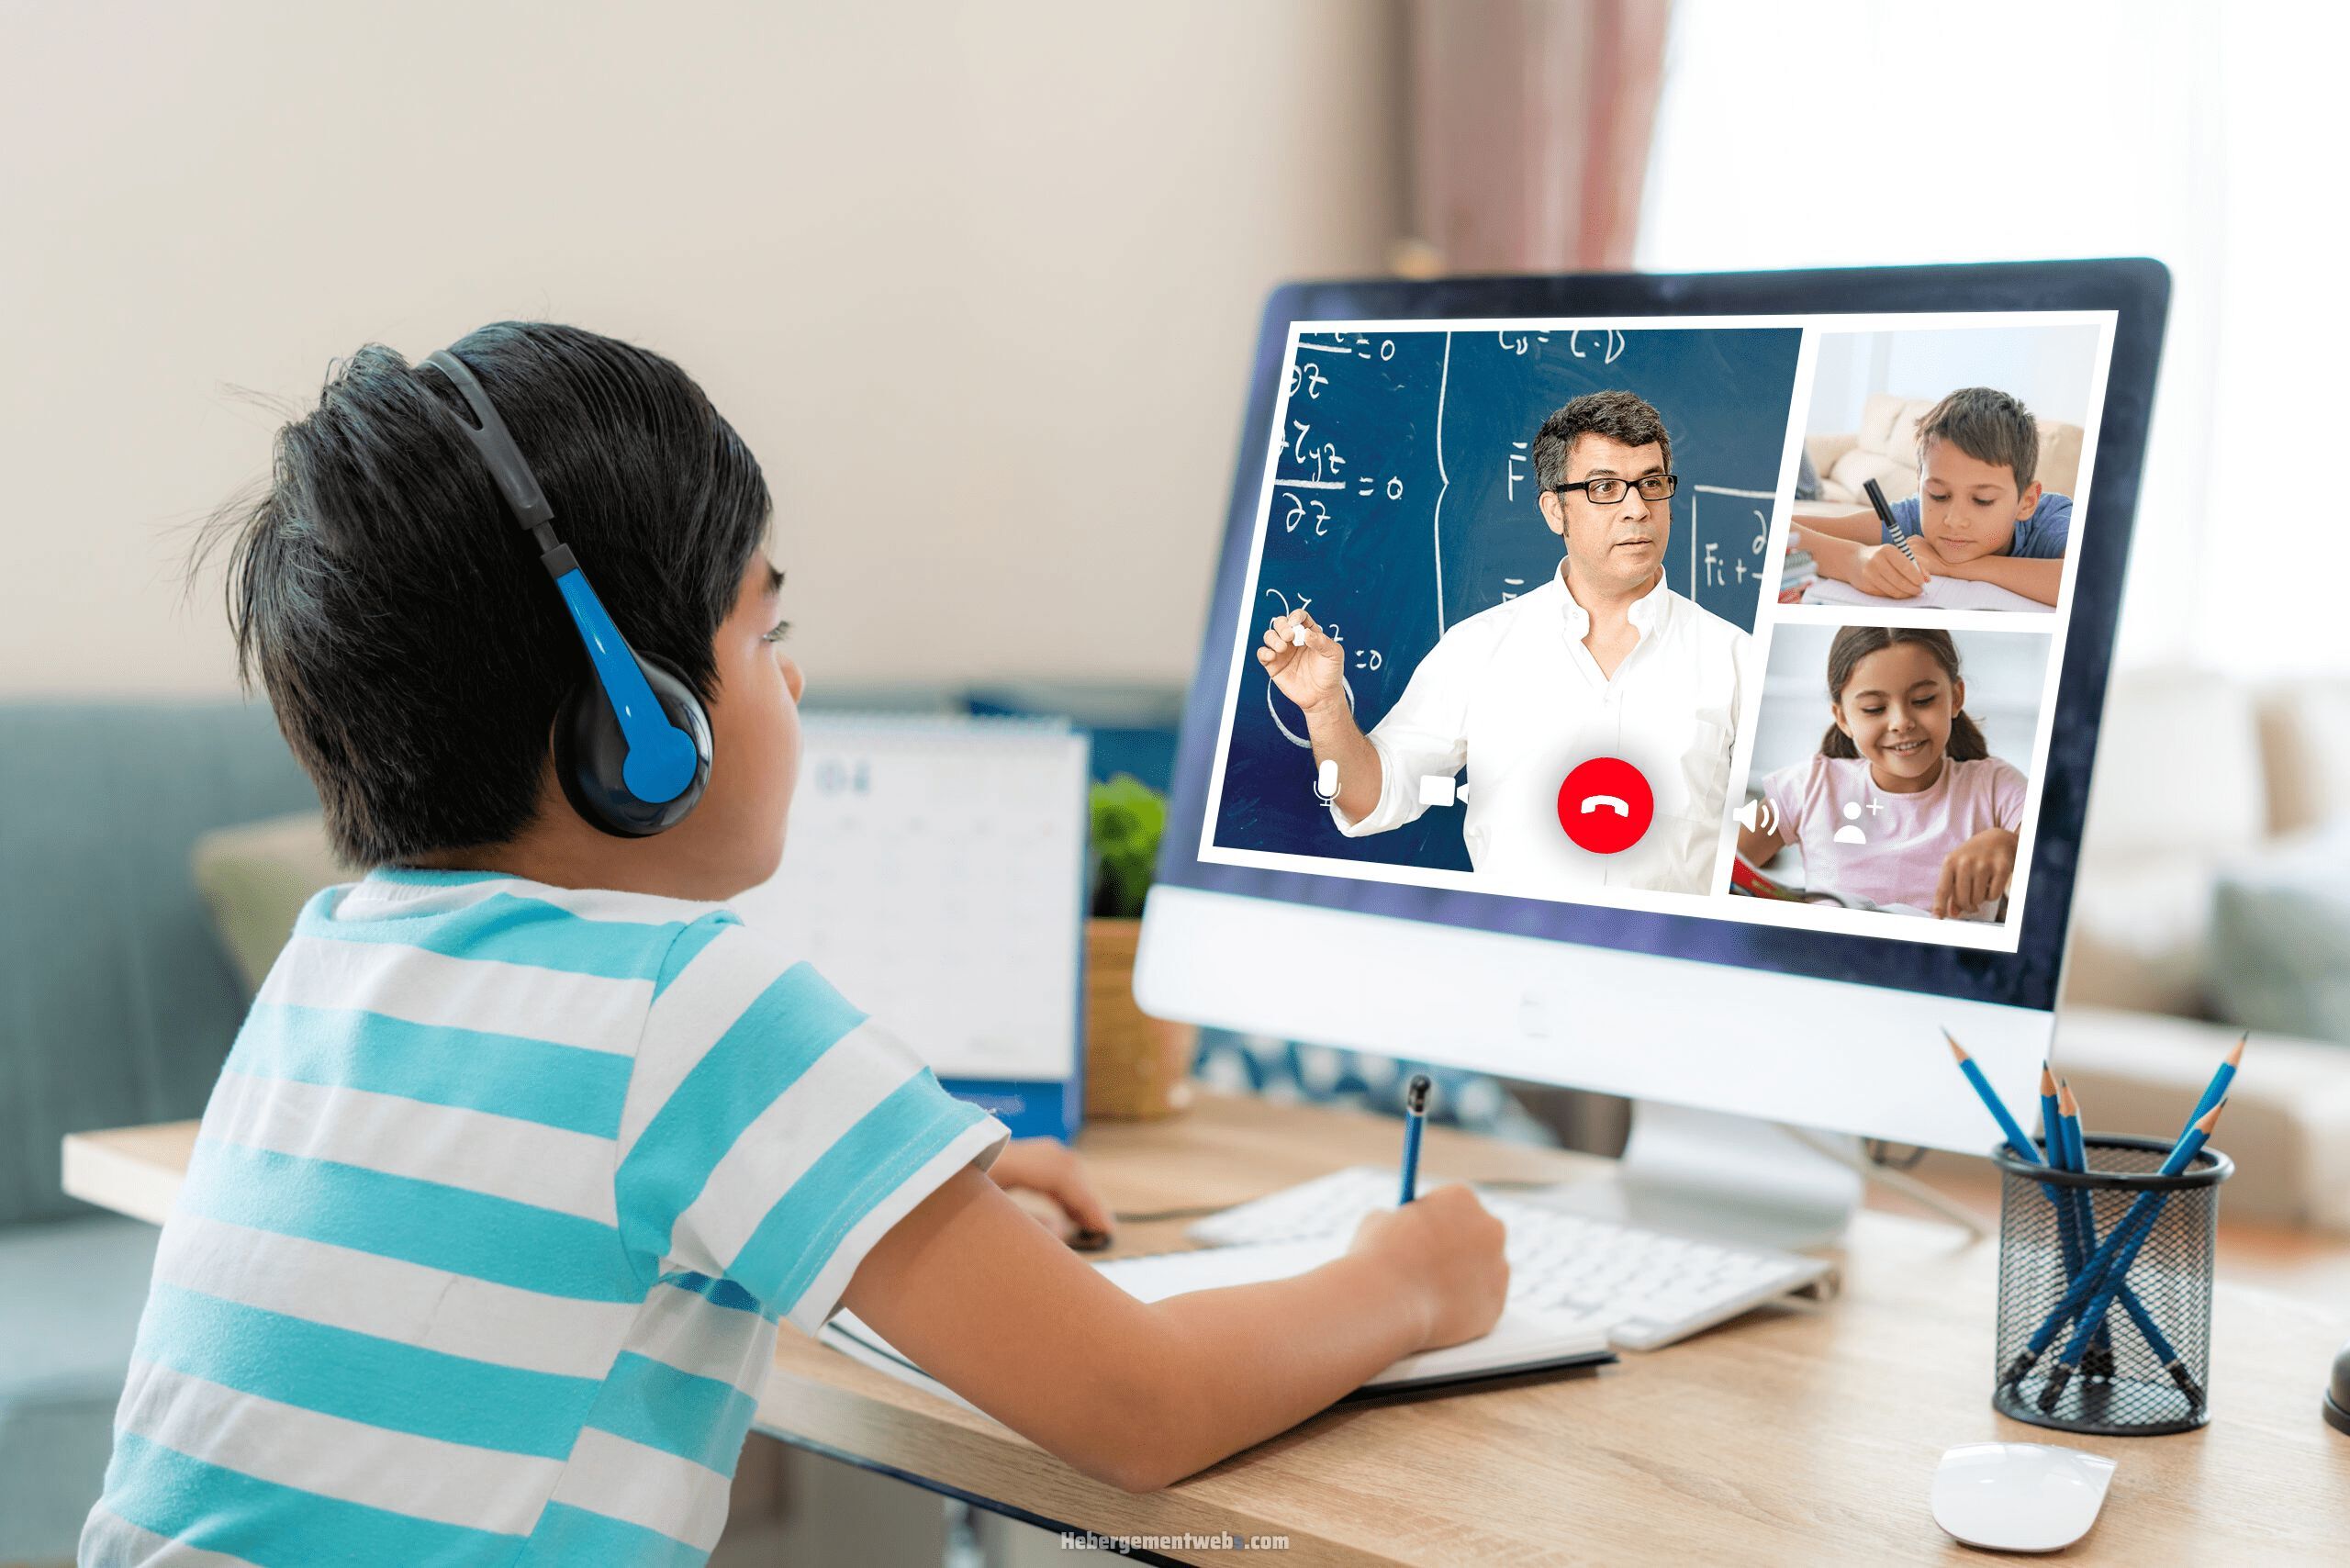 Benefits of Integrating Video Conferencing API and SDK Into Your Existing App